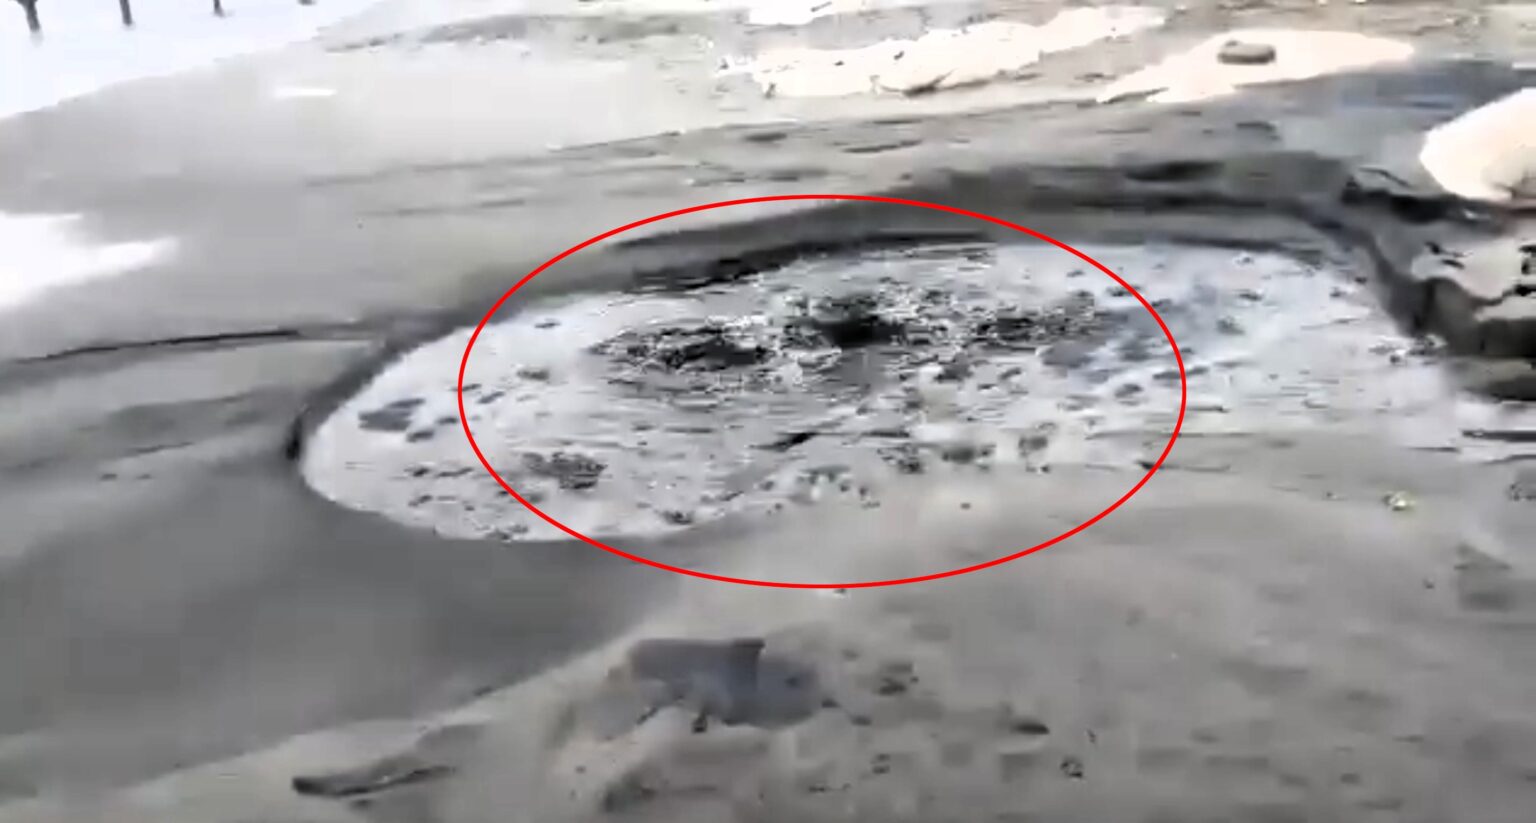 Witnesses at El Puerto Beach, Chancay, Peru, were shocked as boiling stagnant water split the sand, bubbling up and spitting out. Speculation surrounds the cause, with locals noting an old pipe discovery nearby.